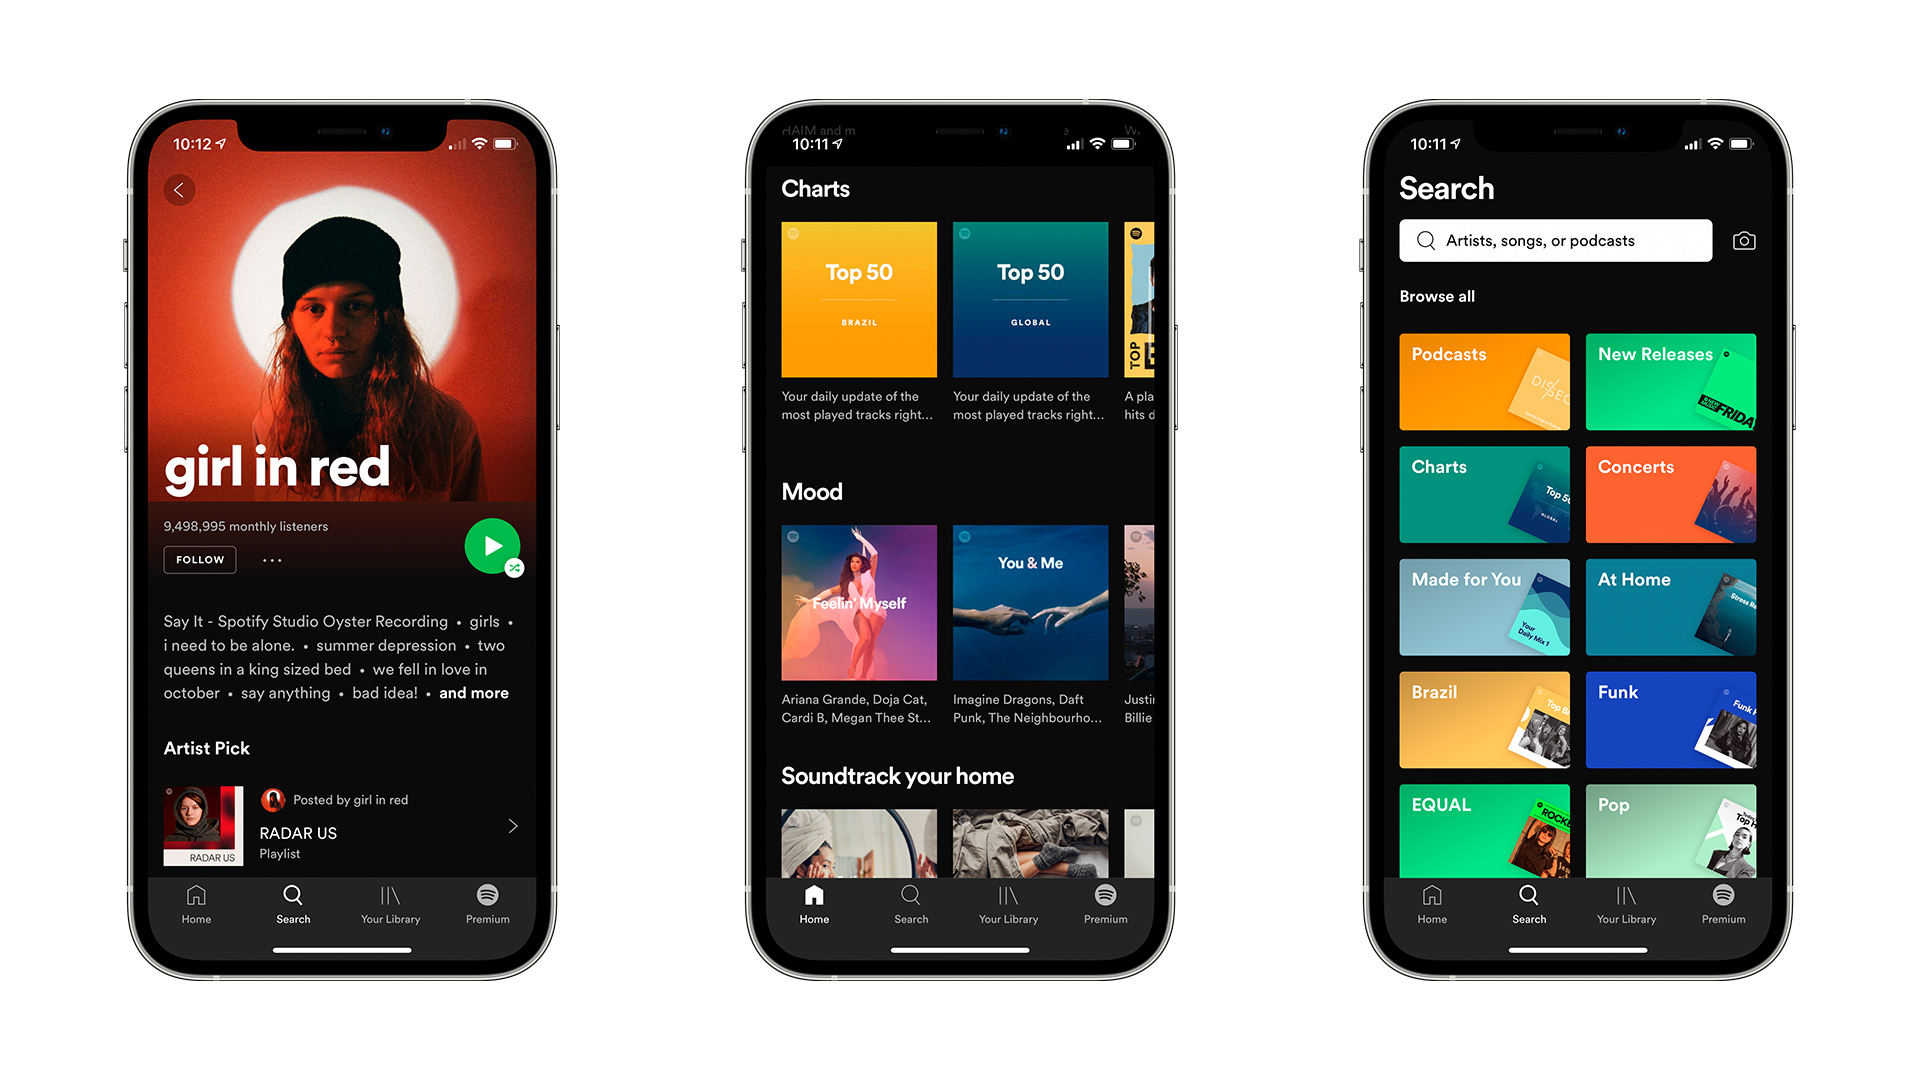 apple music vs spotify differences